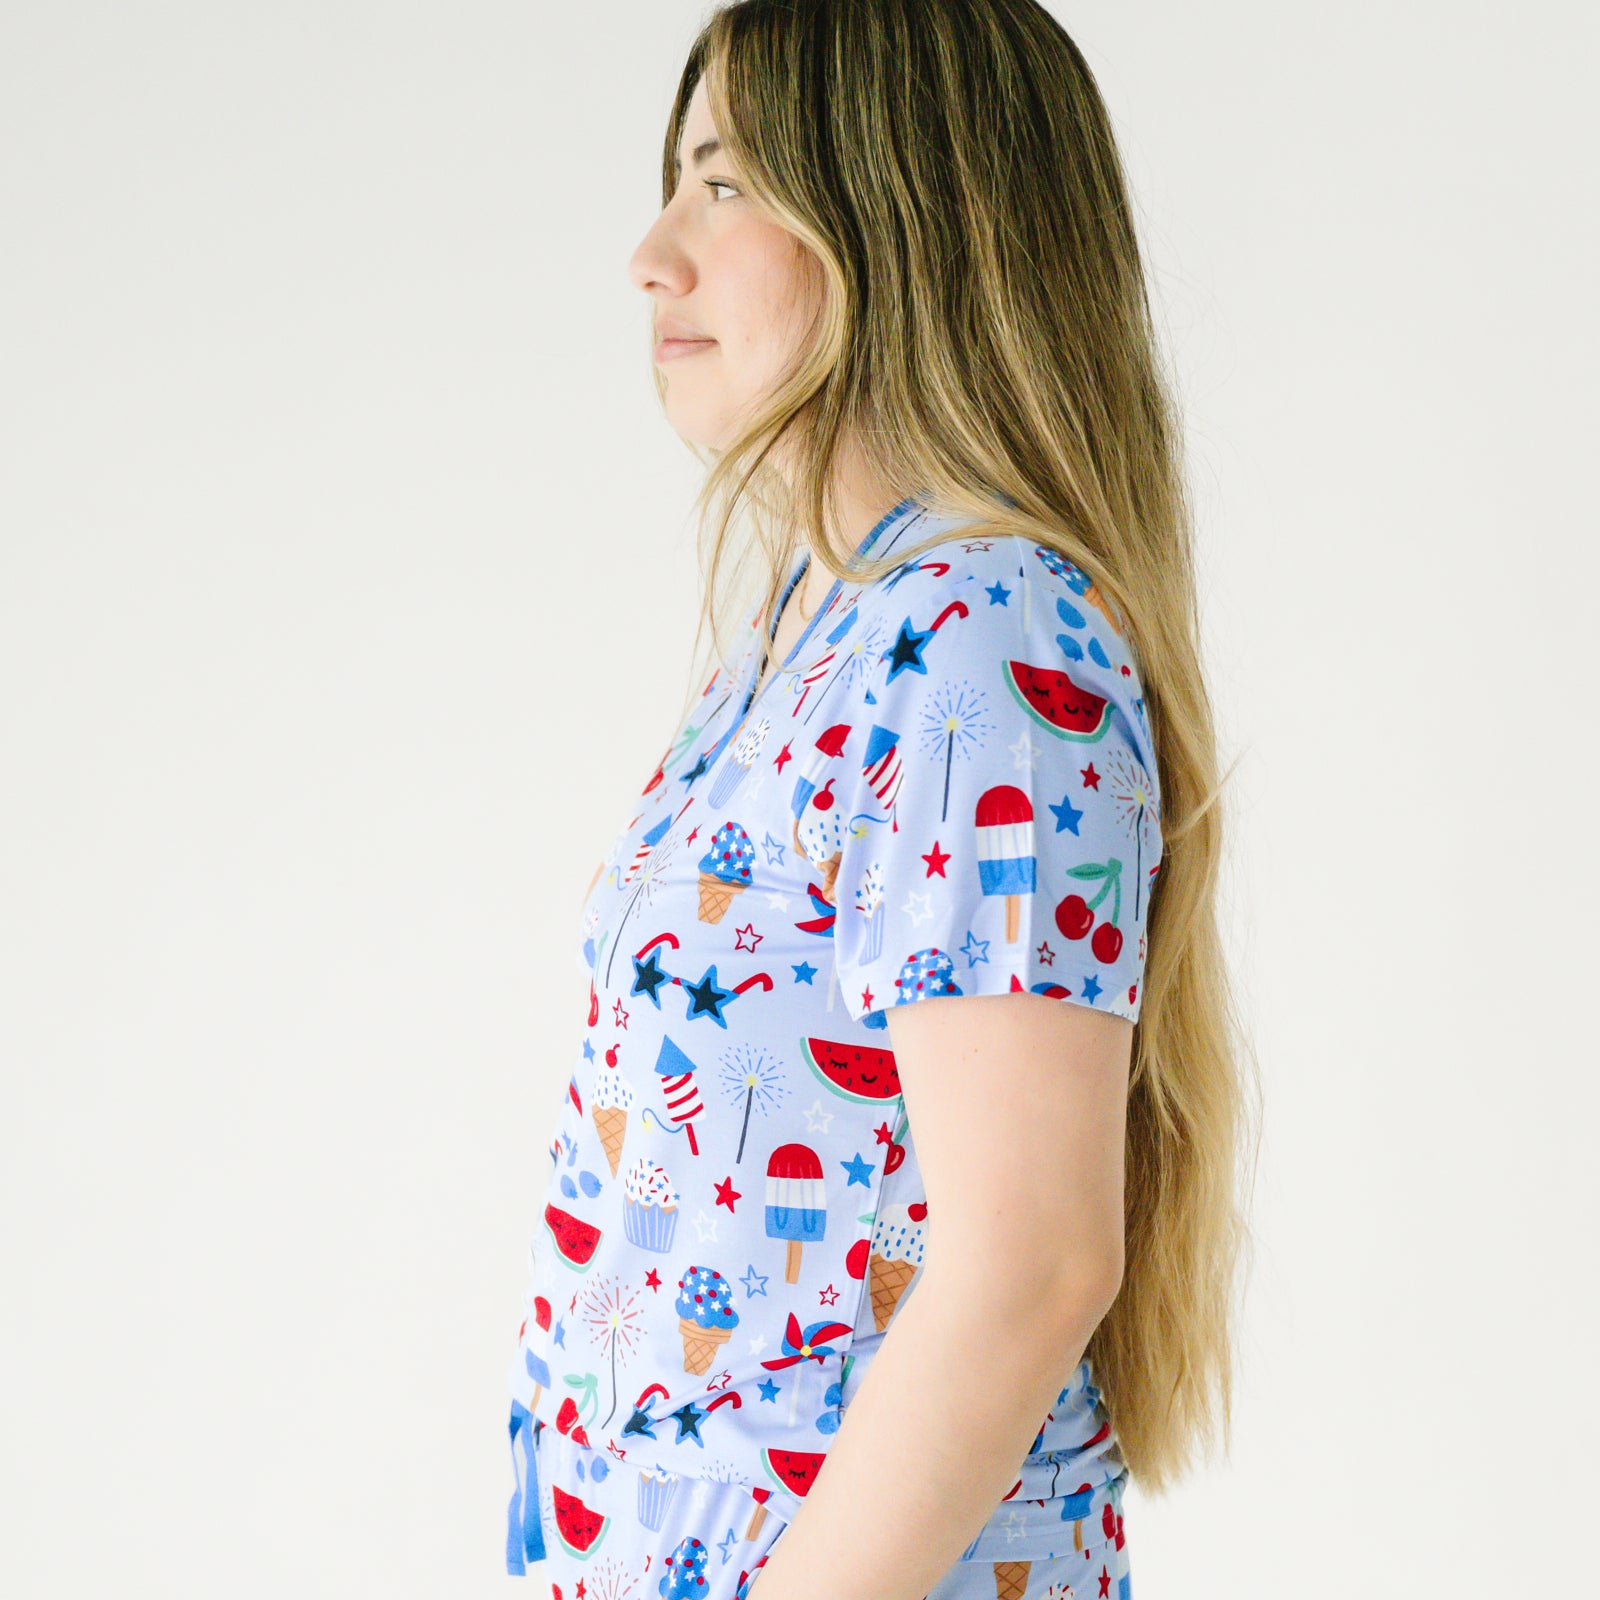 Profile image of a woman wearing a Stars, Stripes, and Sweets women's pajama top